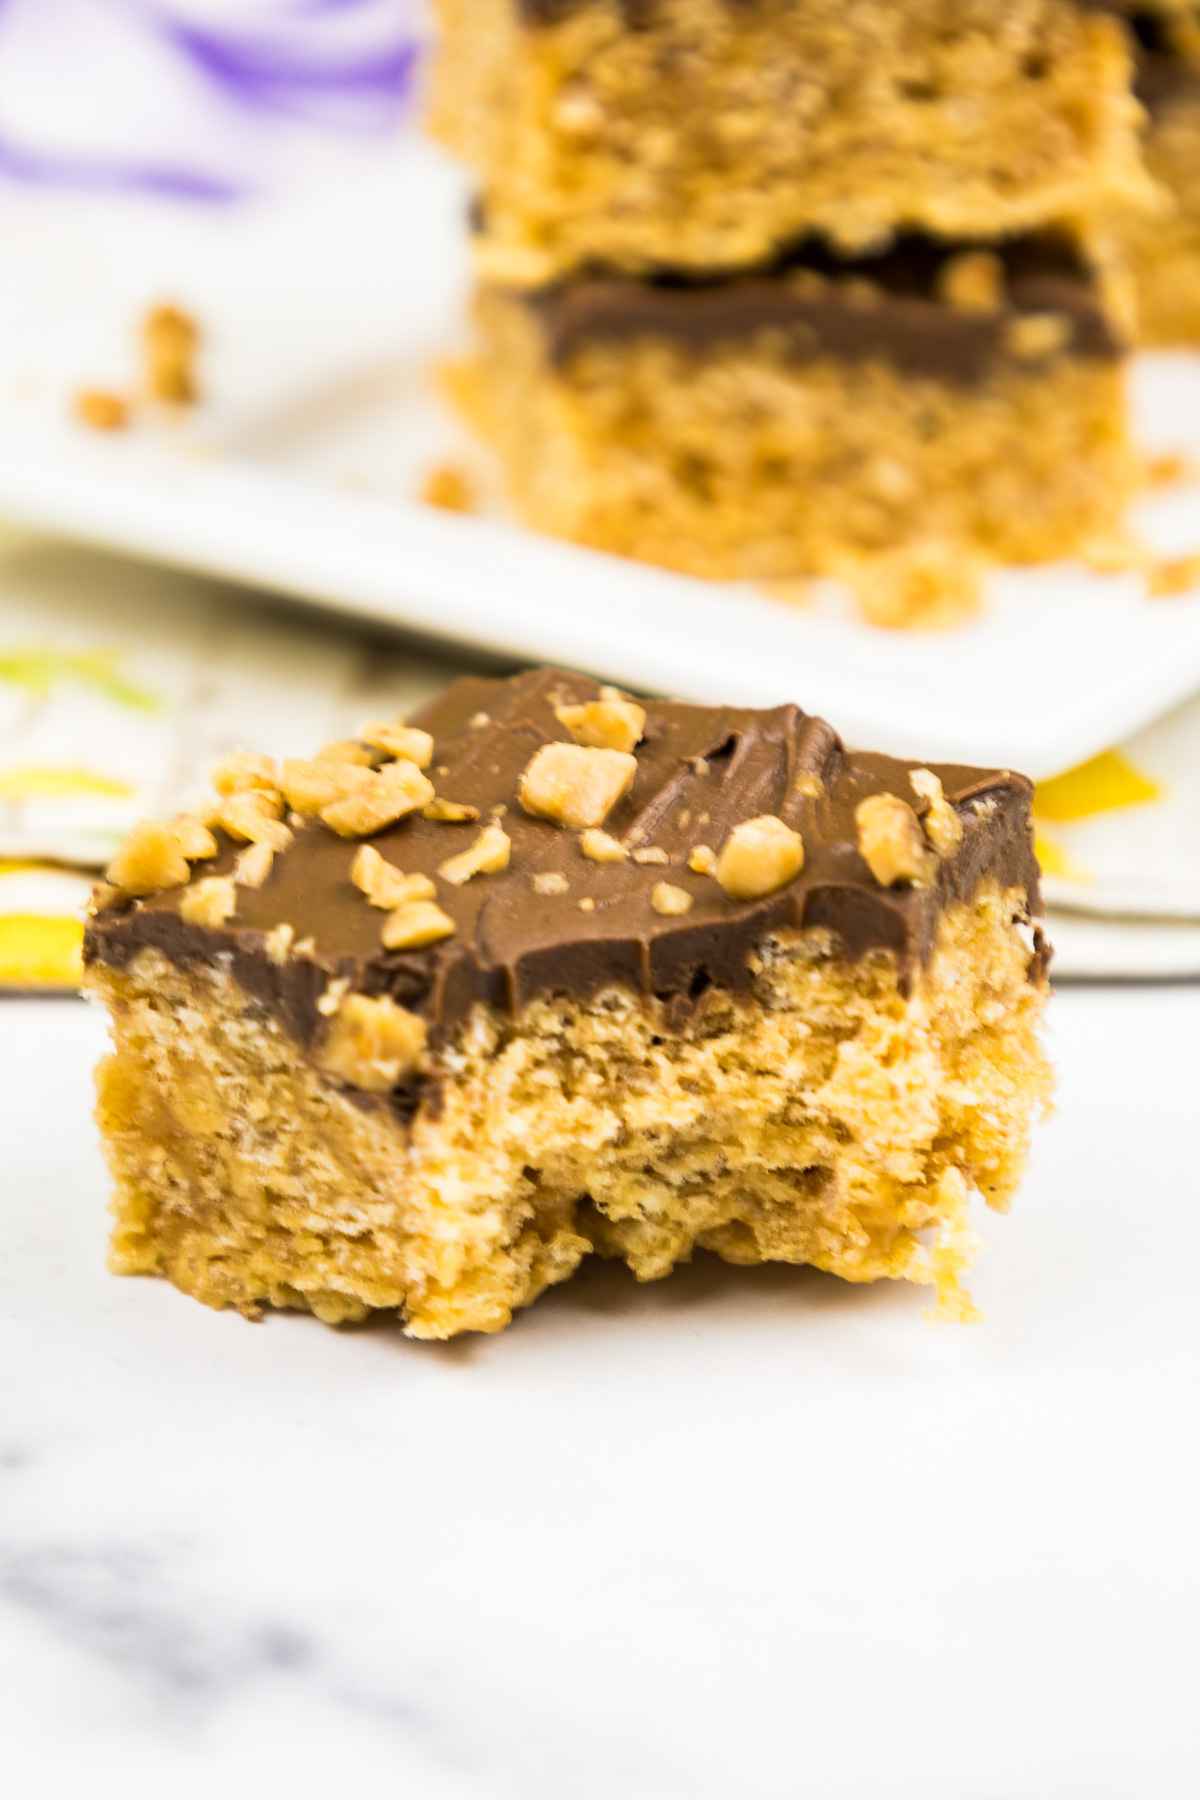 One no bake bar with a bite taken from with more bars in the background.